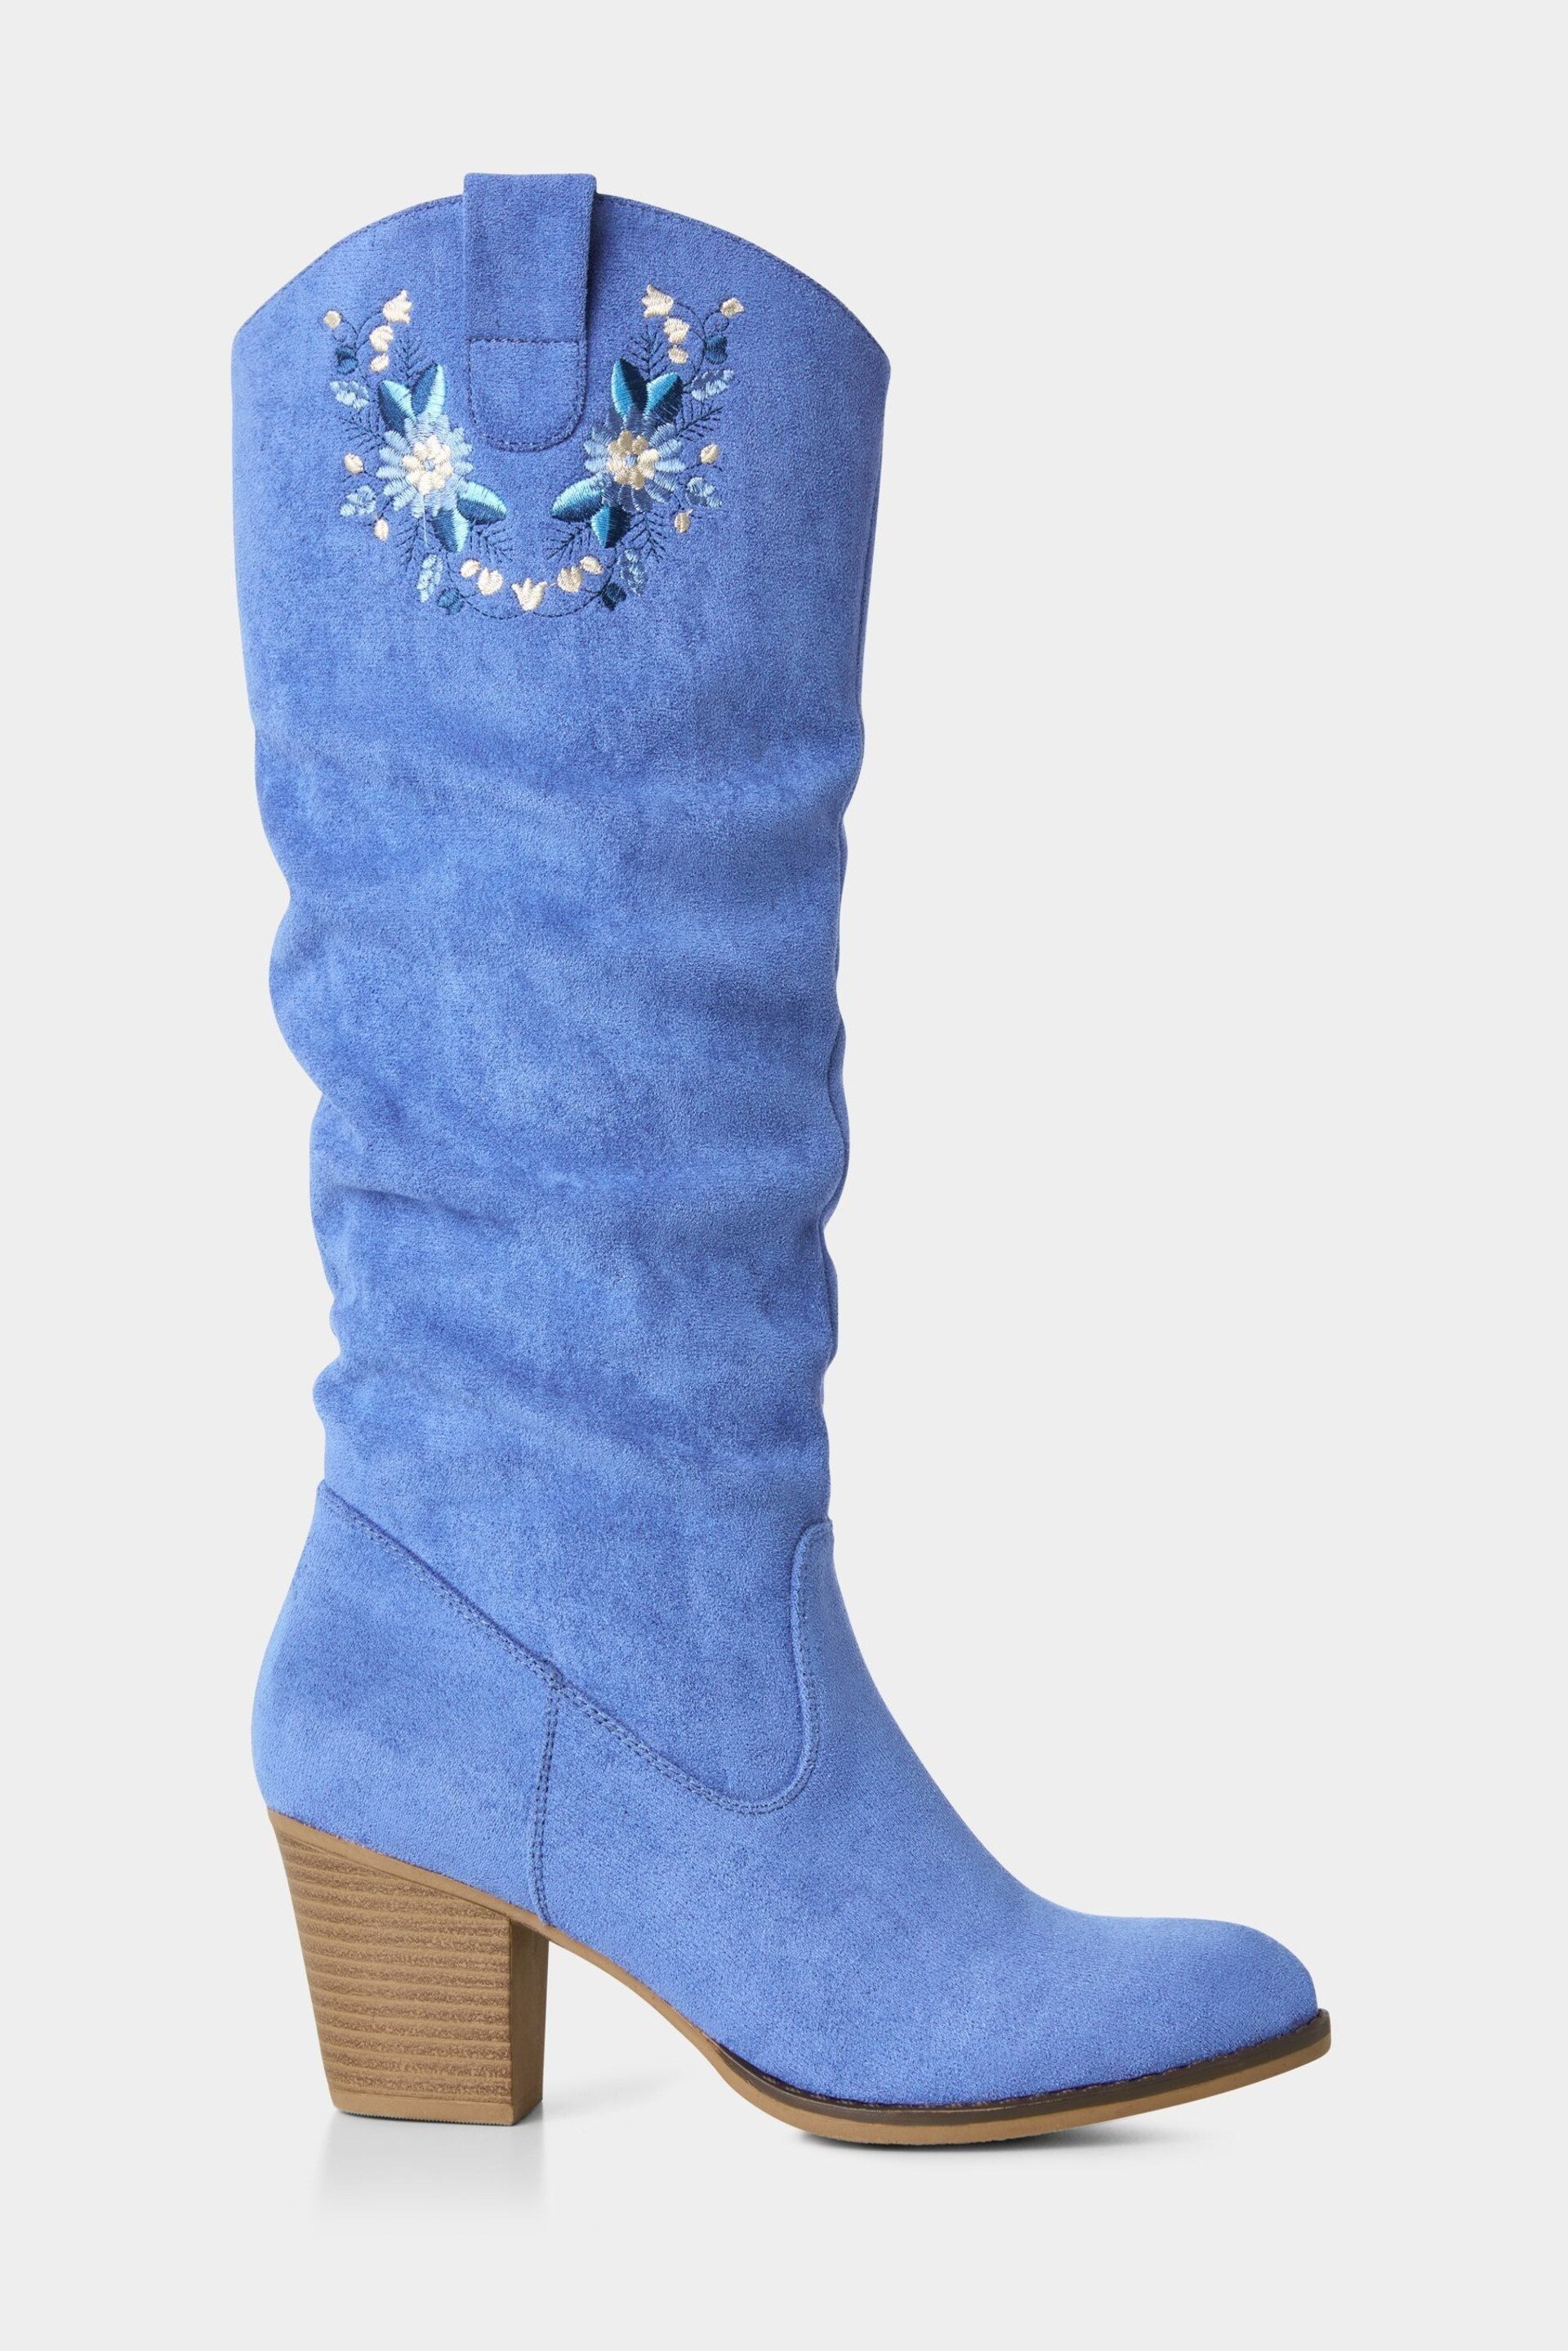 Joe Browns Blue Embroidered Knee High Boots - Image 2 of 5